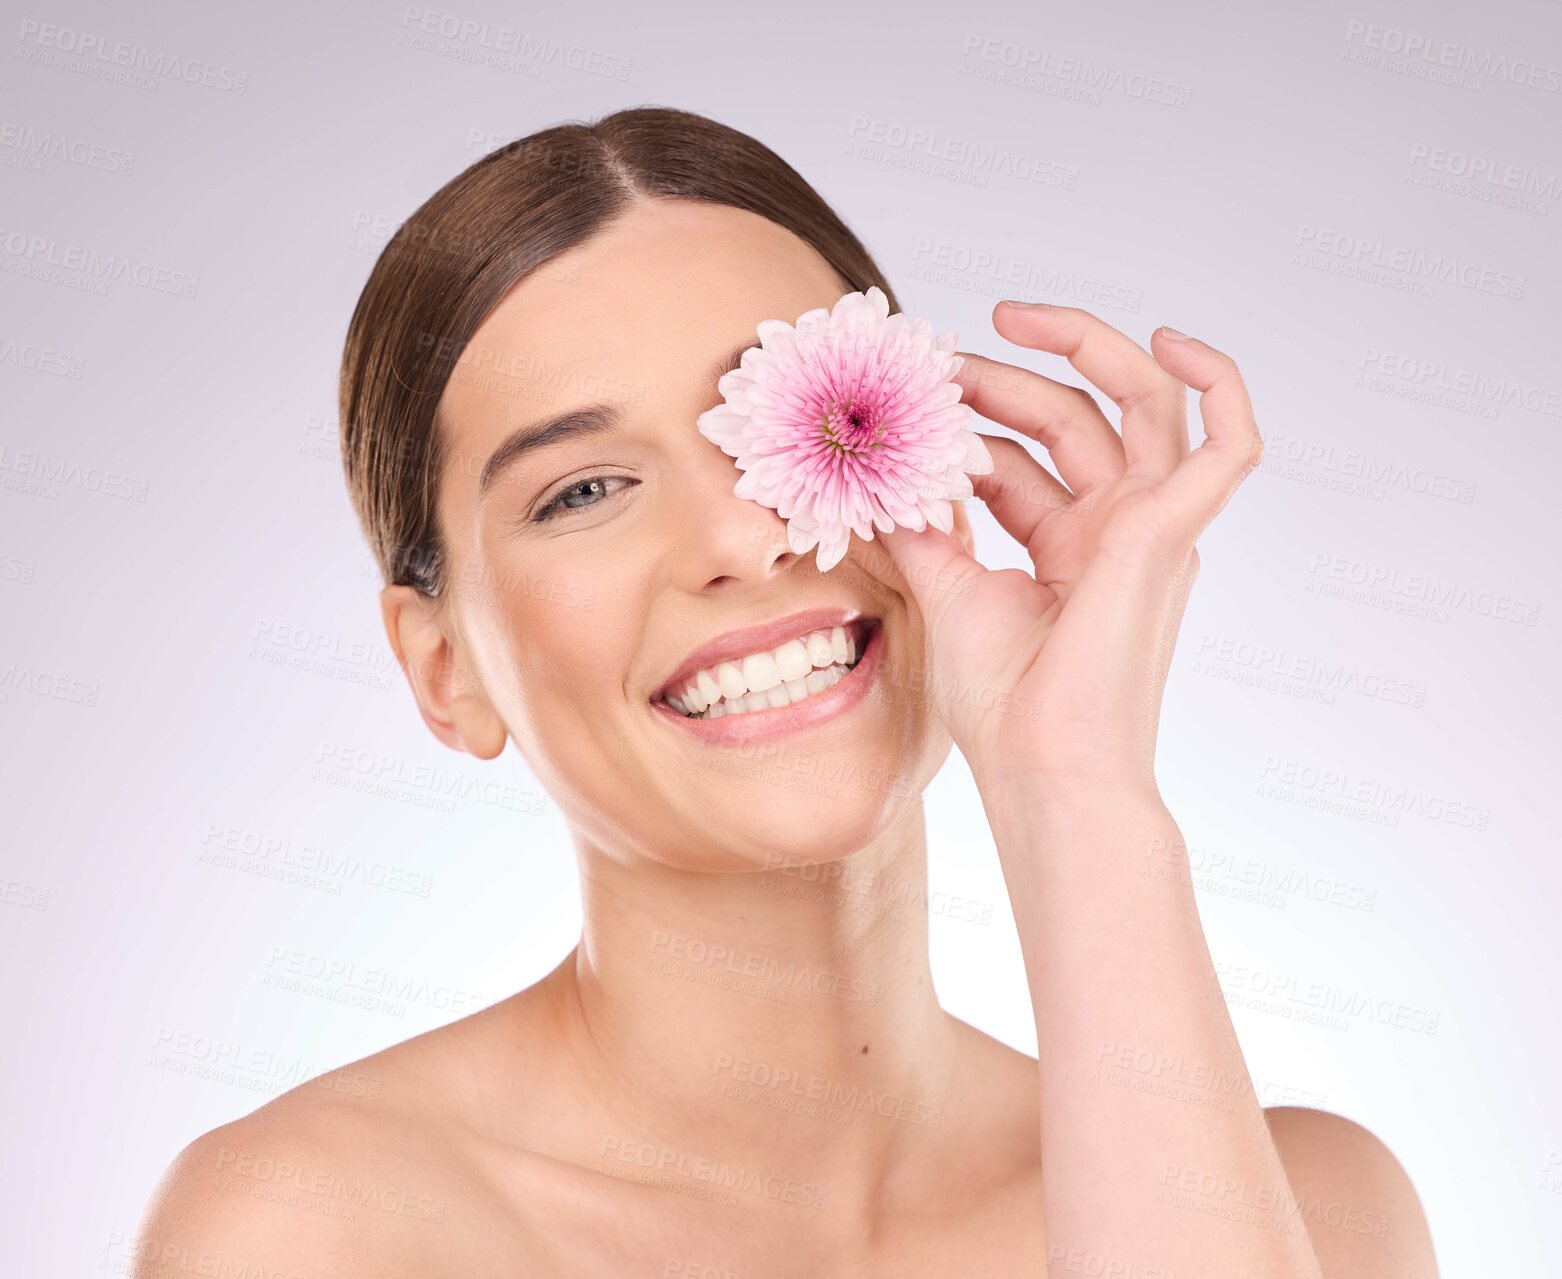 Buy stock photo Portrait, flowers or face of happy woman with creative facial design, floral product and healthy skincare glow. Makeup cosmetics, smile or girl model with natural beauty isolated on studio background